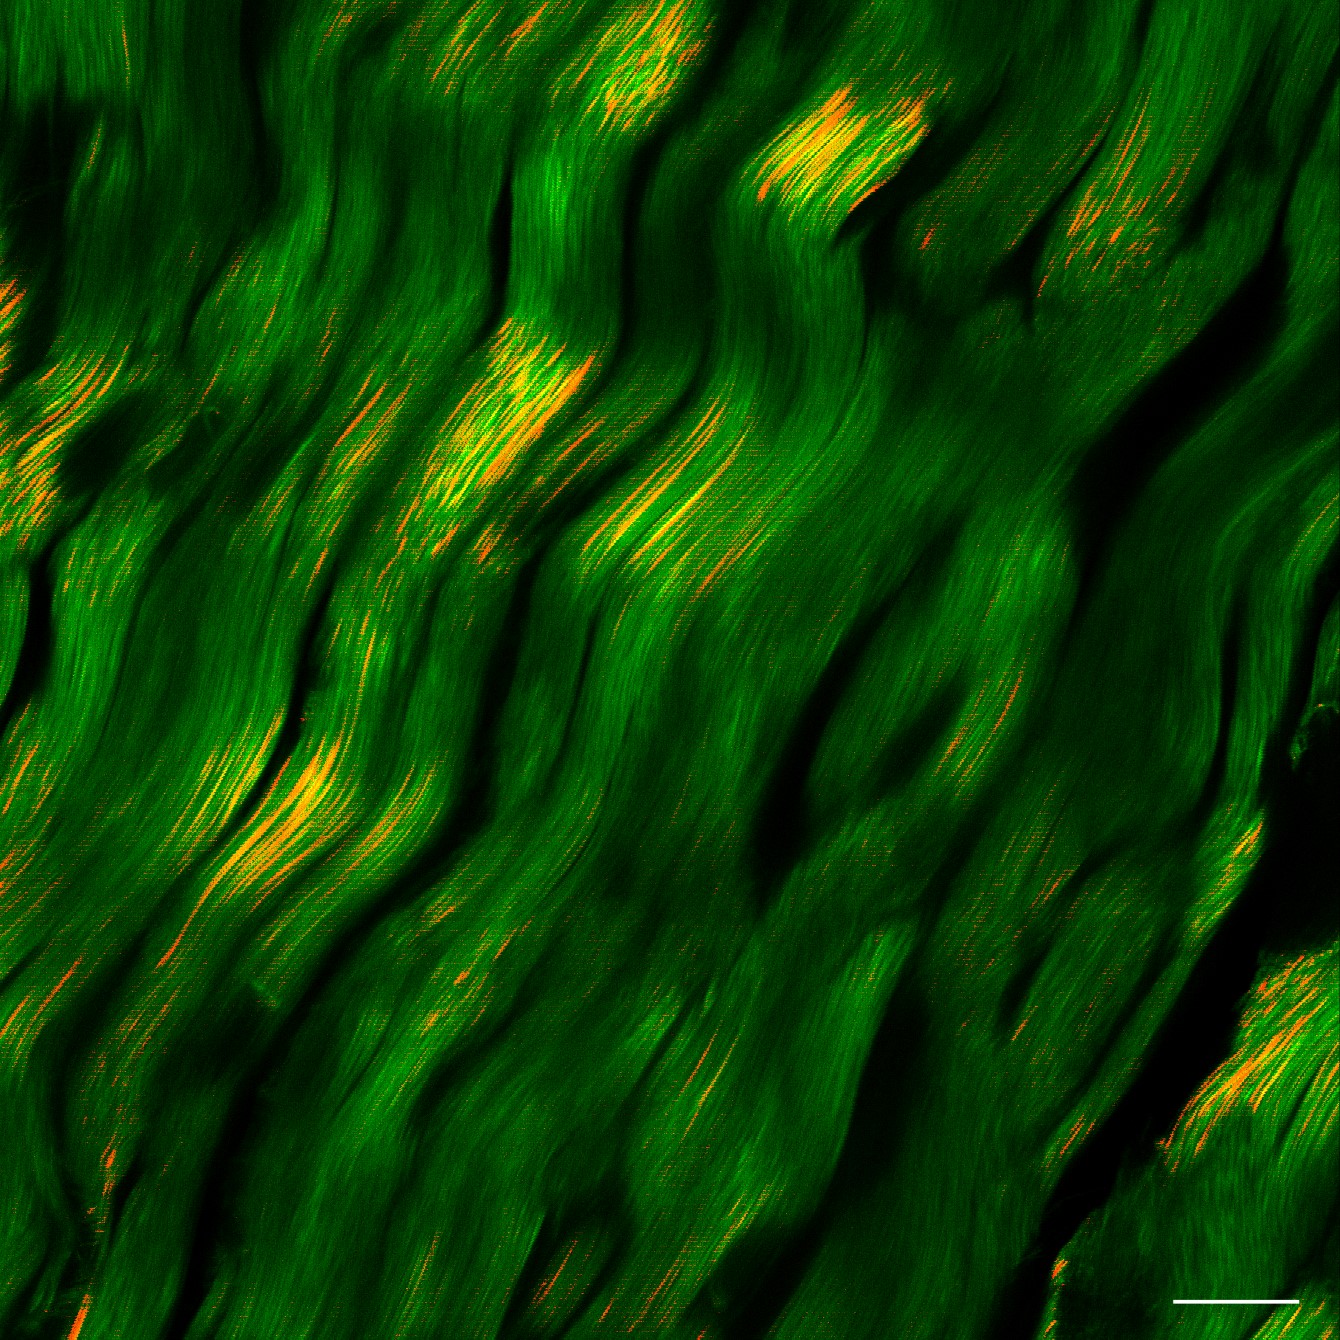 The image illustrates the collagen microstructure of a pig's digital flexor tendon, captured using second harmonic generation (SHG) microscopy in the longitudinal orientation.